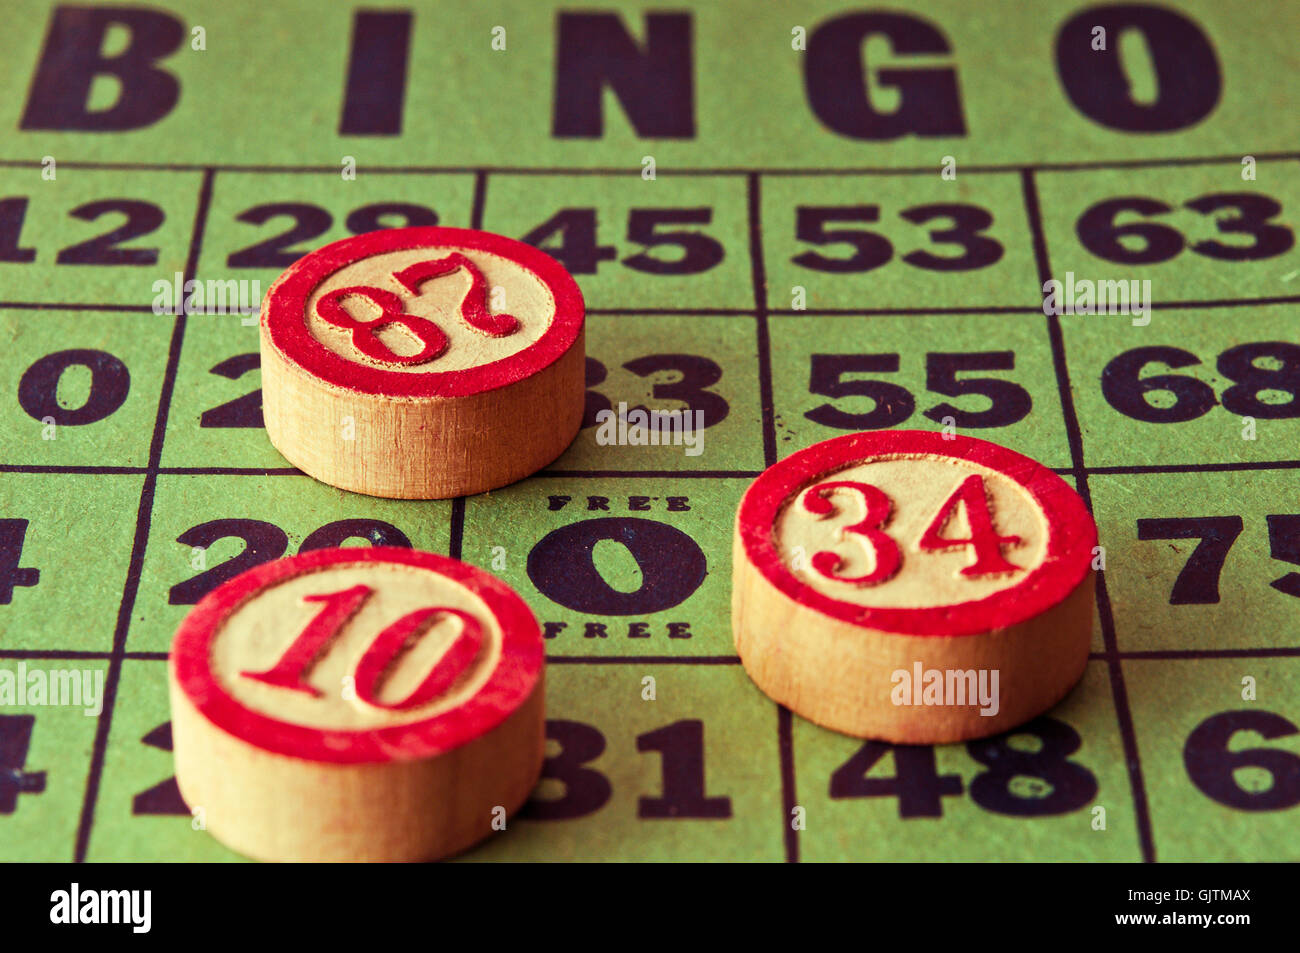 how did the bingo card game get its name and how many ways can you win on a 90 number ticket